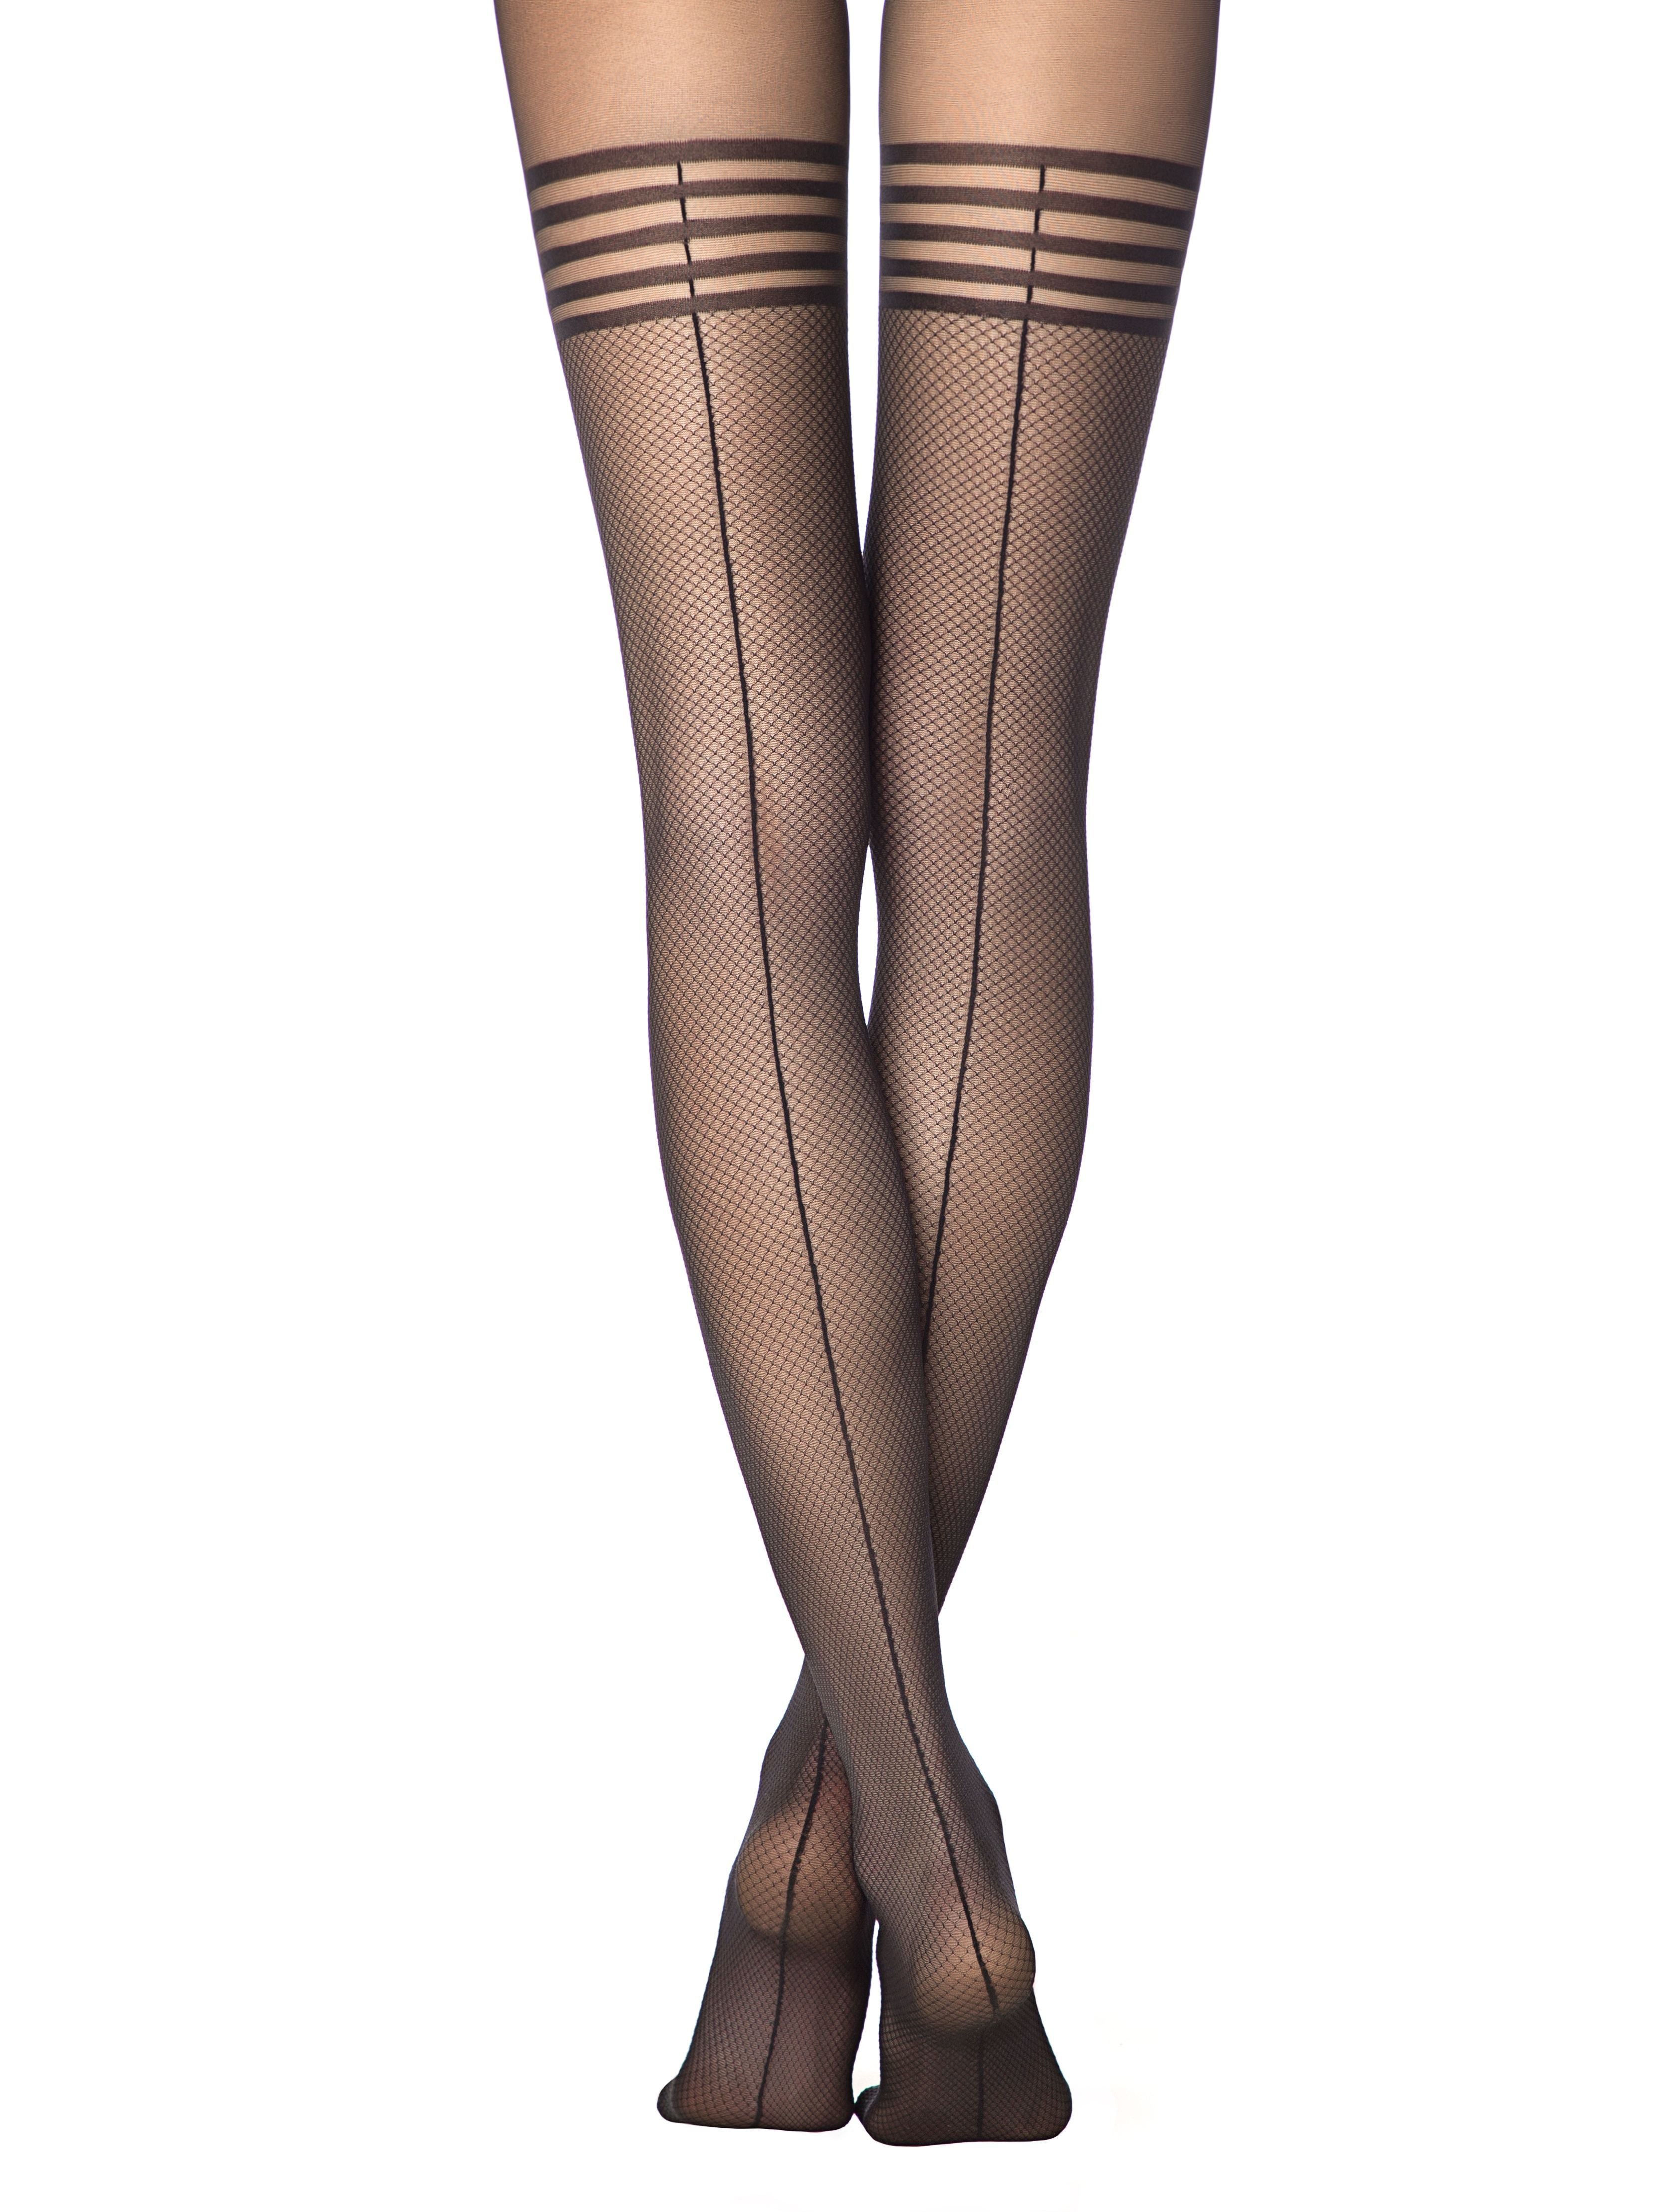 Sheer suspenders sexy stockings hold-ups black tights pantyhose Conte Impress